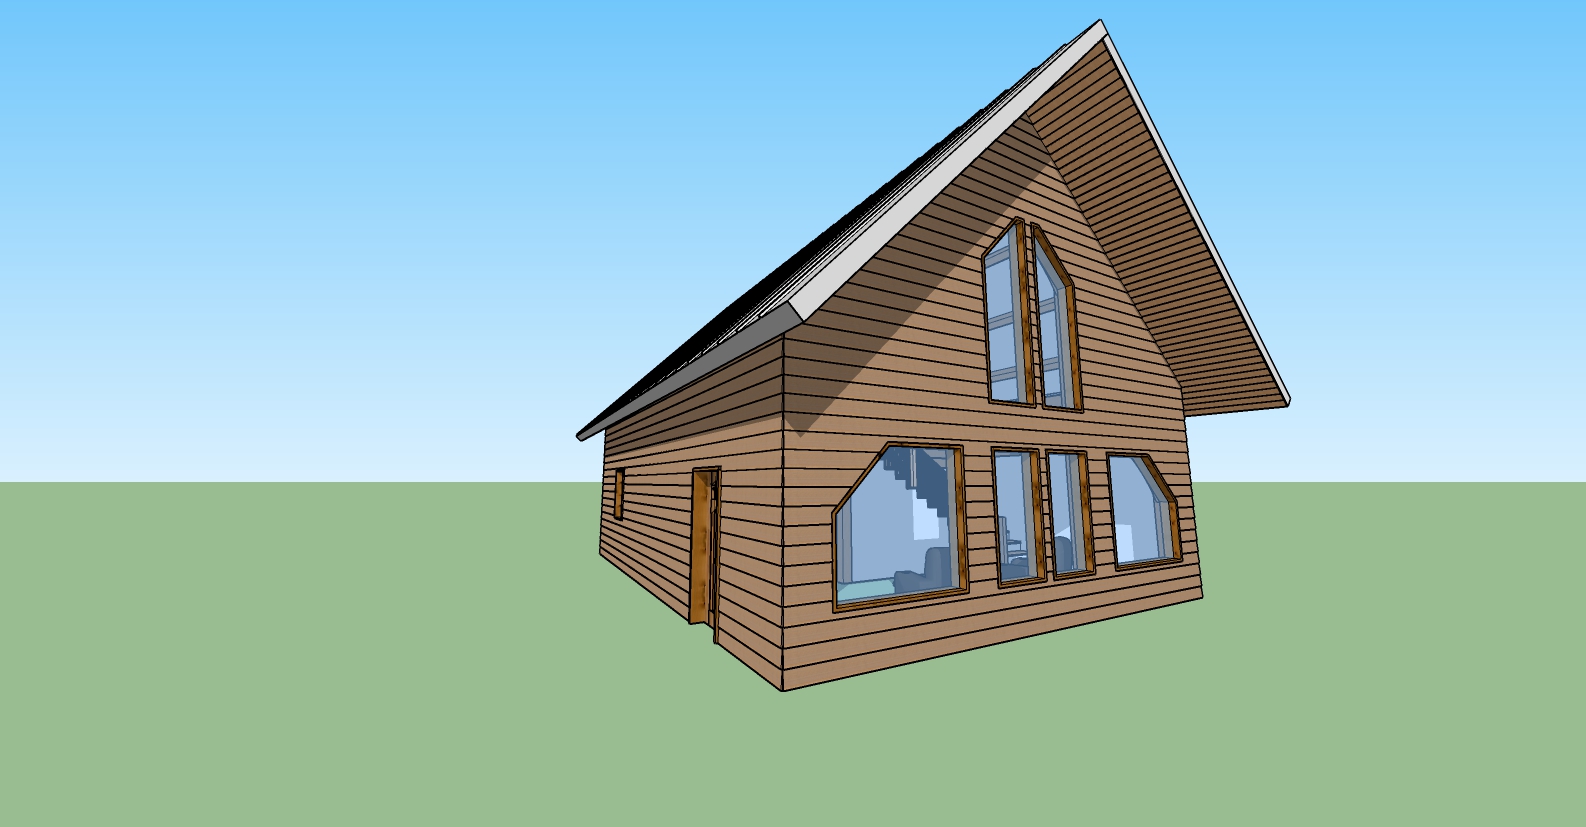 A 3 d rendering of the front view of a house.